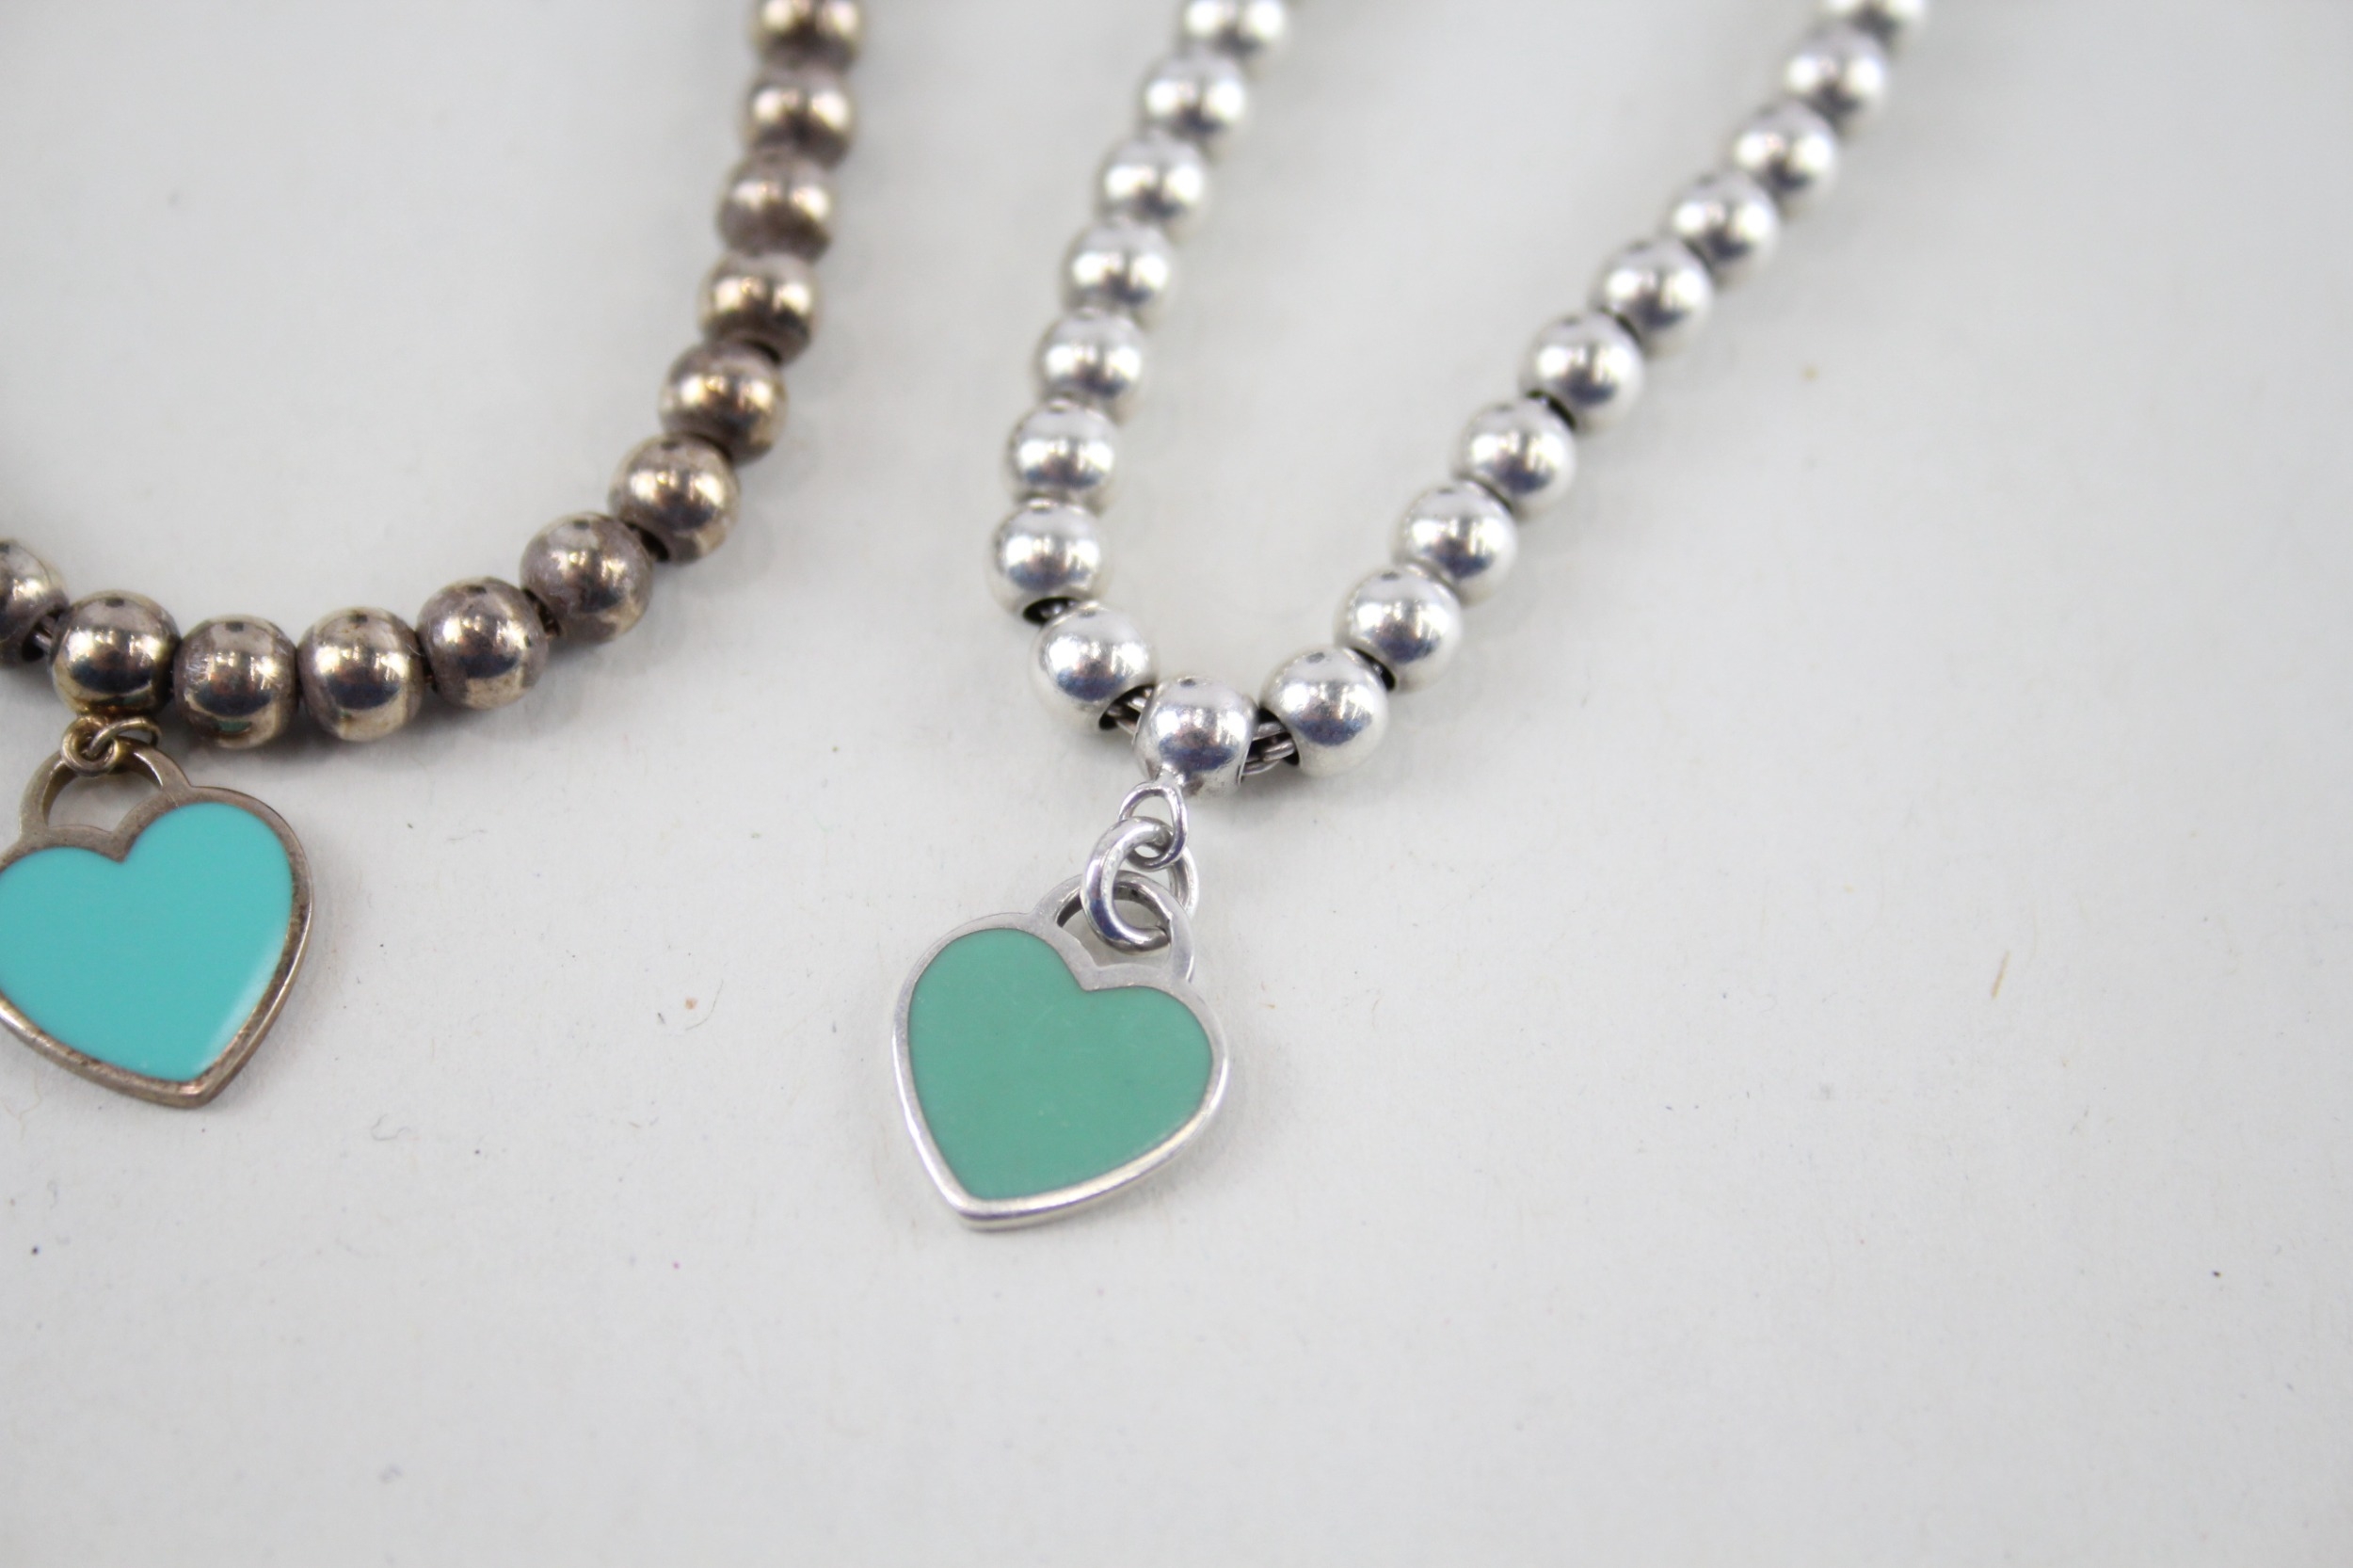 Two silver bracelets with enamel heart charms by designer Tiffany & Co (11g) - Image 3 of 7